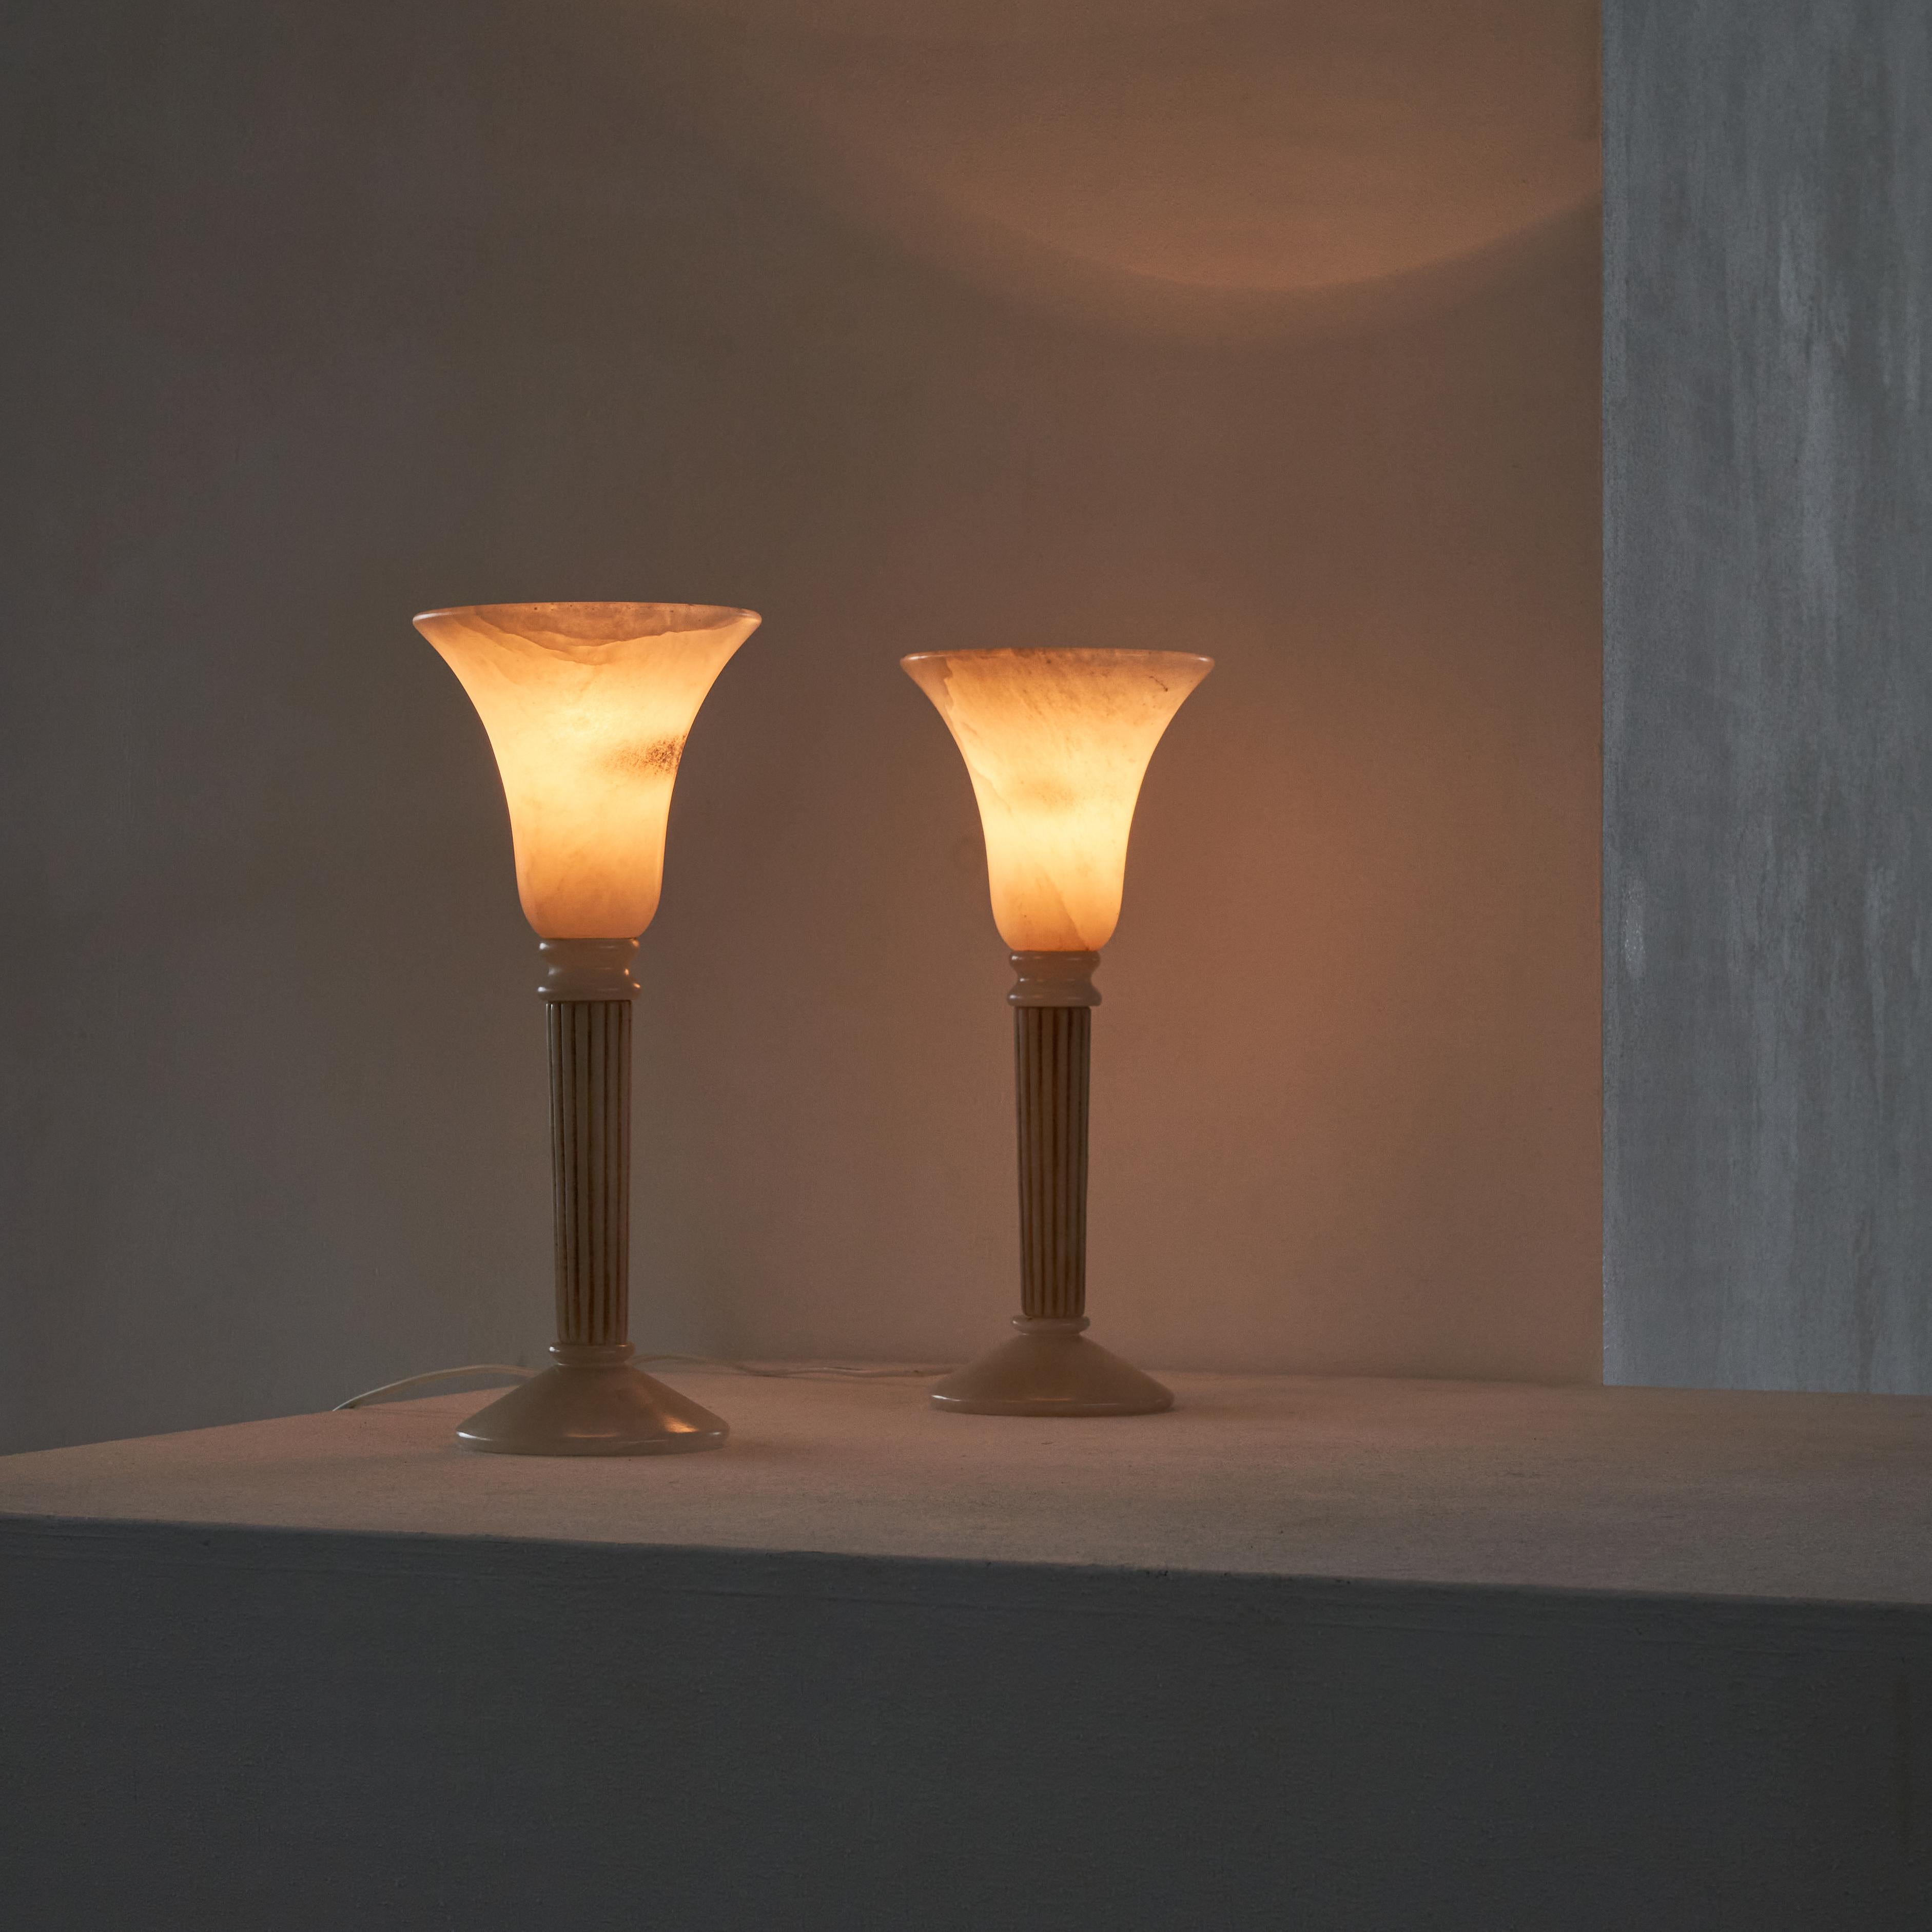 Pair of Alabaster table lamps.

Wonderful pair of alabaster table lamps. Classic shape and elegance, combined with a very soft and warm light when lit. A stylish pair to lighten up your living room, bedroom or home office. 

The alabaster lights